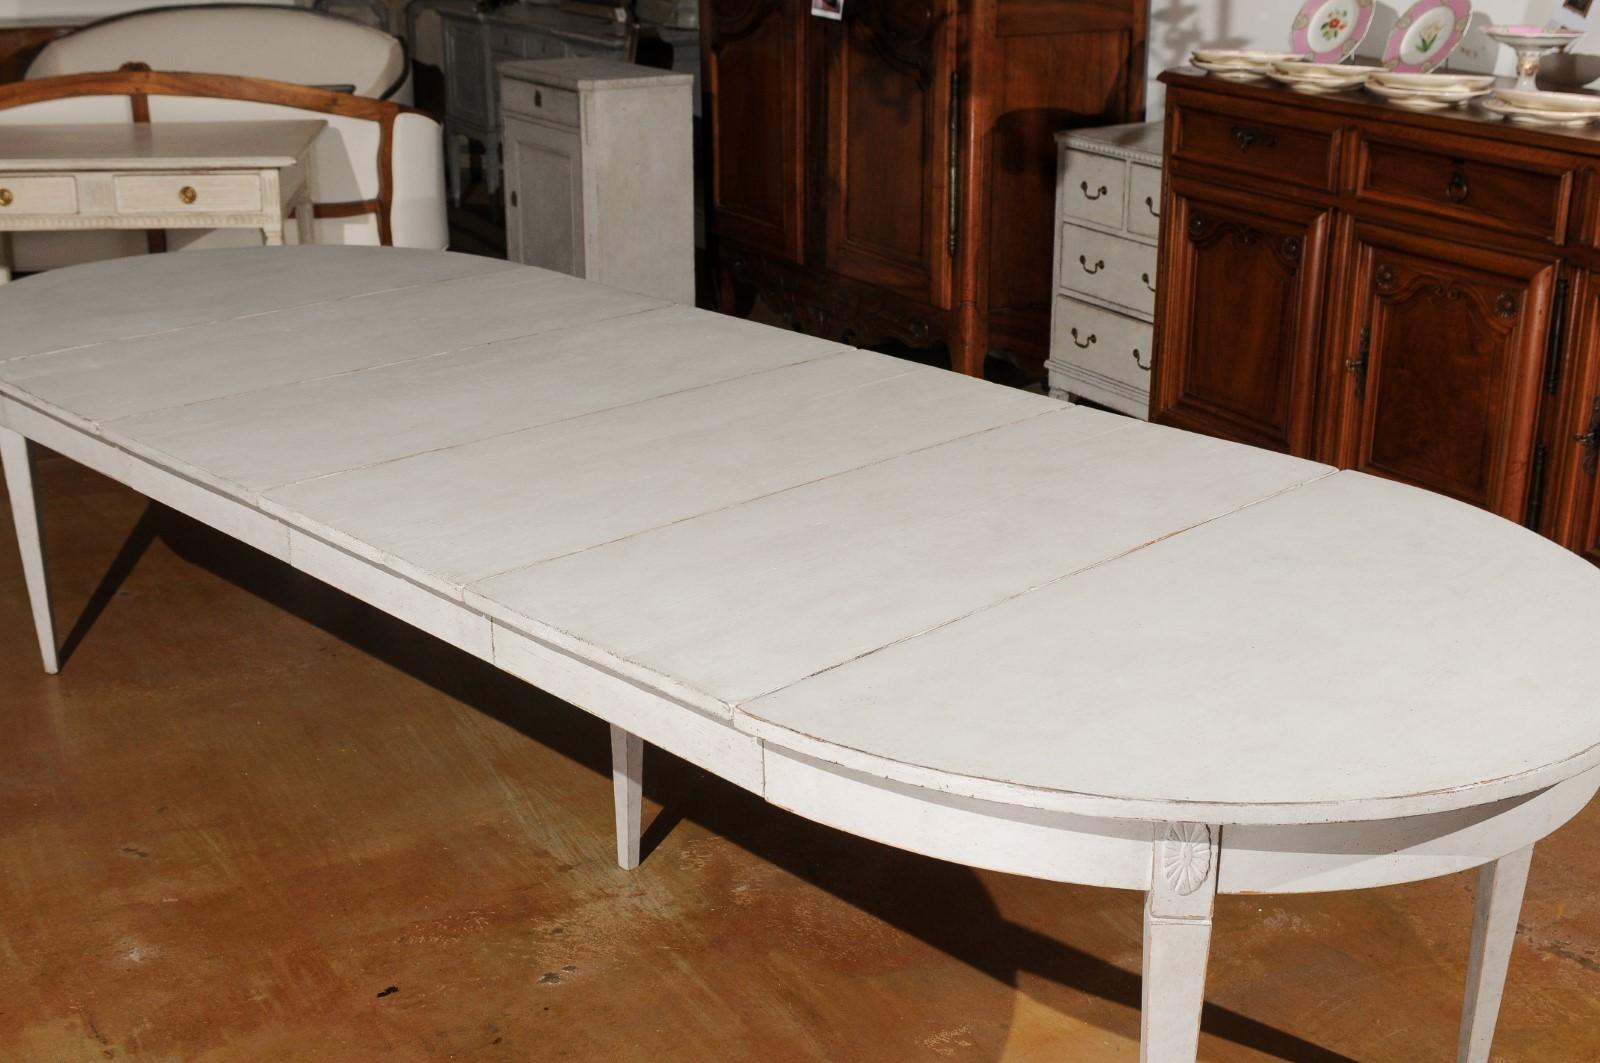 19th Century Swedish Painted Wood Oval Dining Room Table with Four Leaves and Medallions